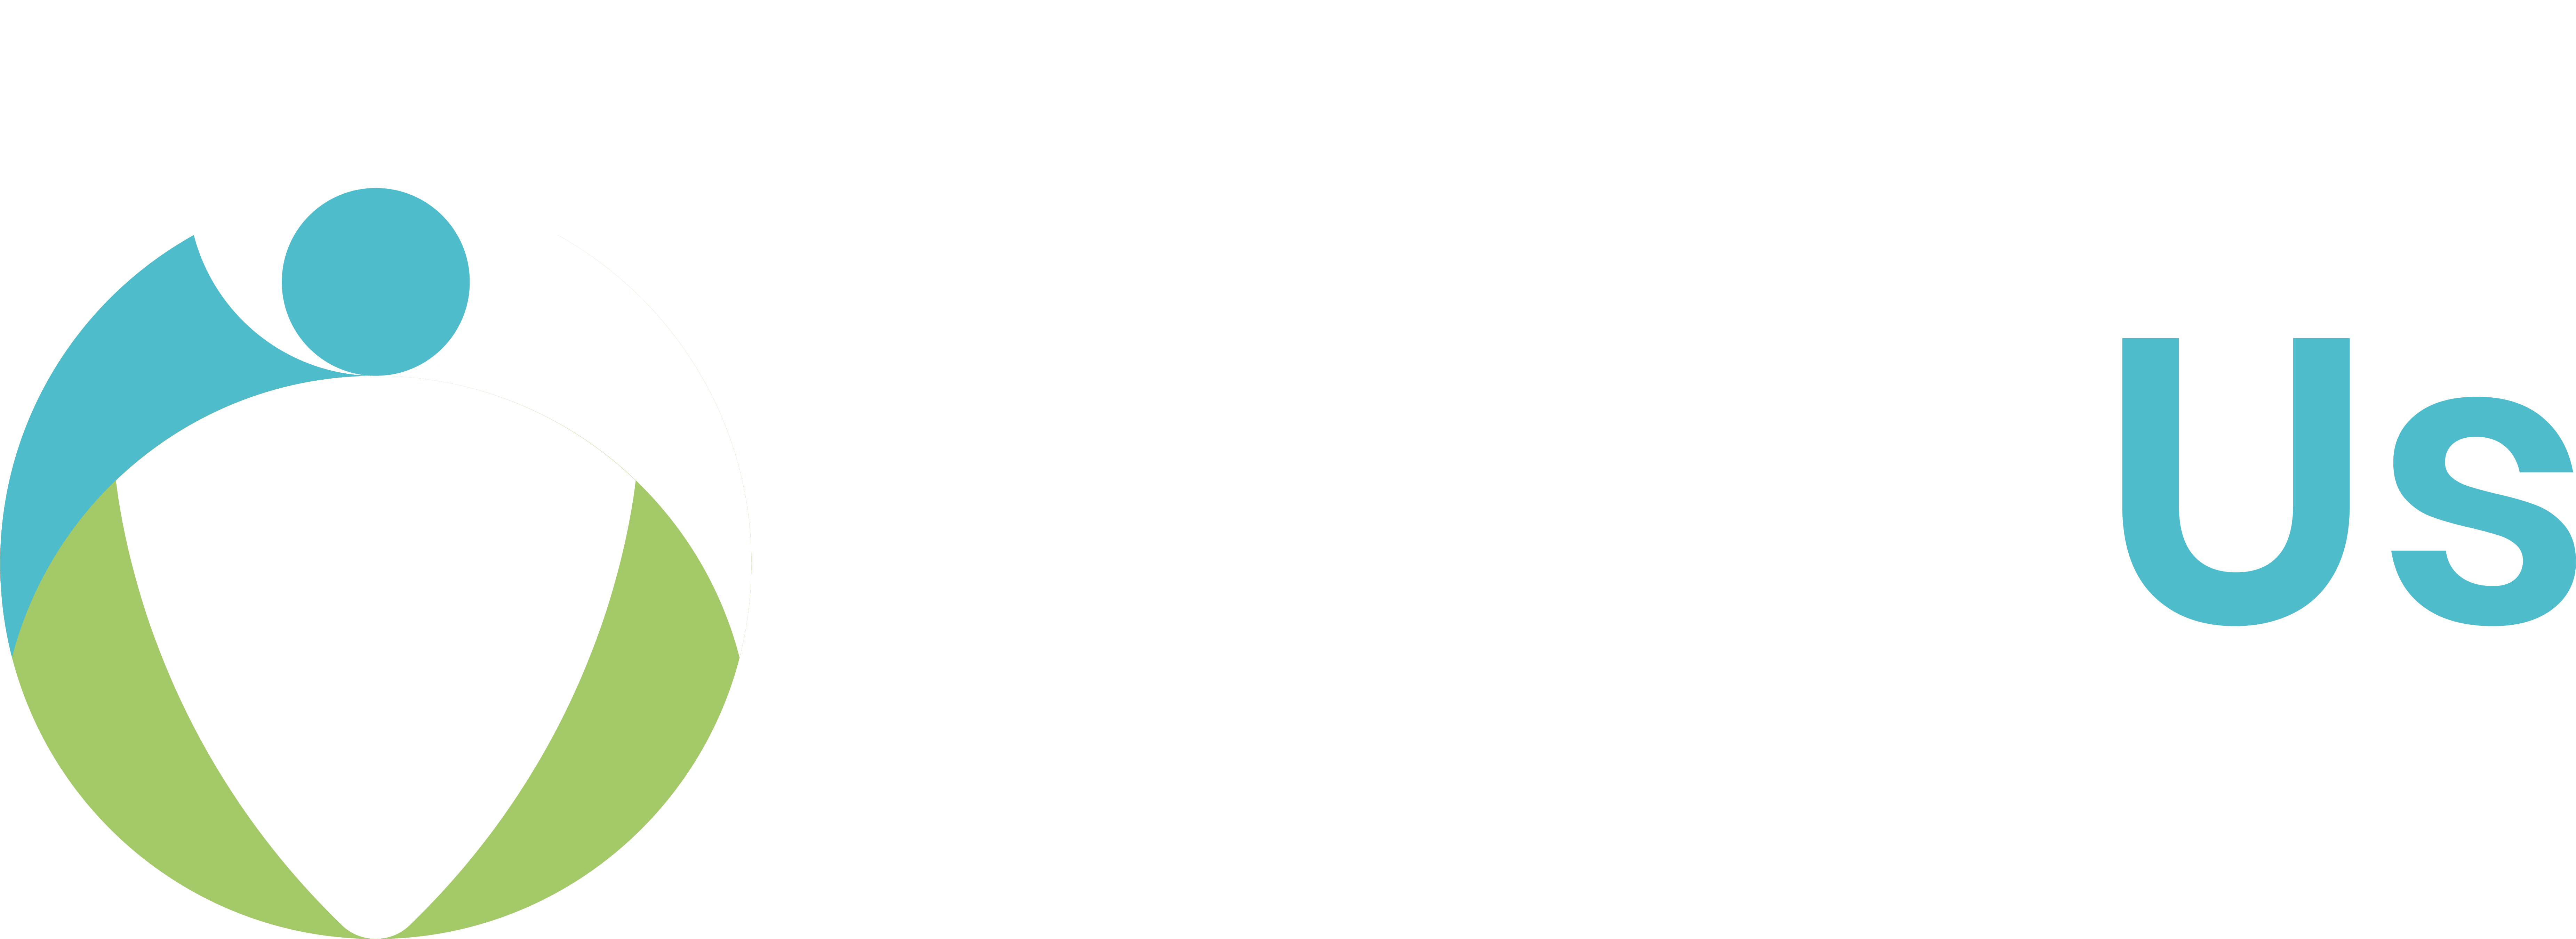 Shield Us Branding and Graphic Design